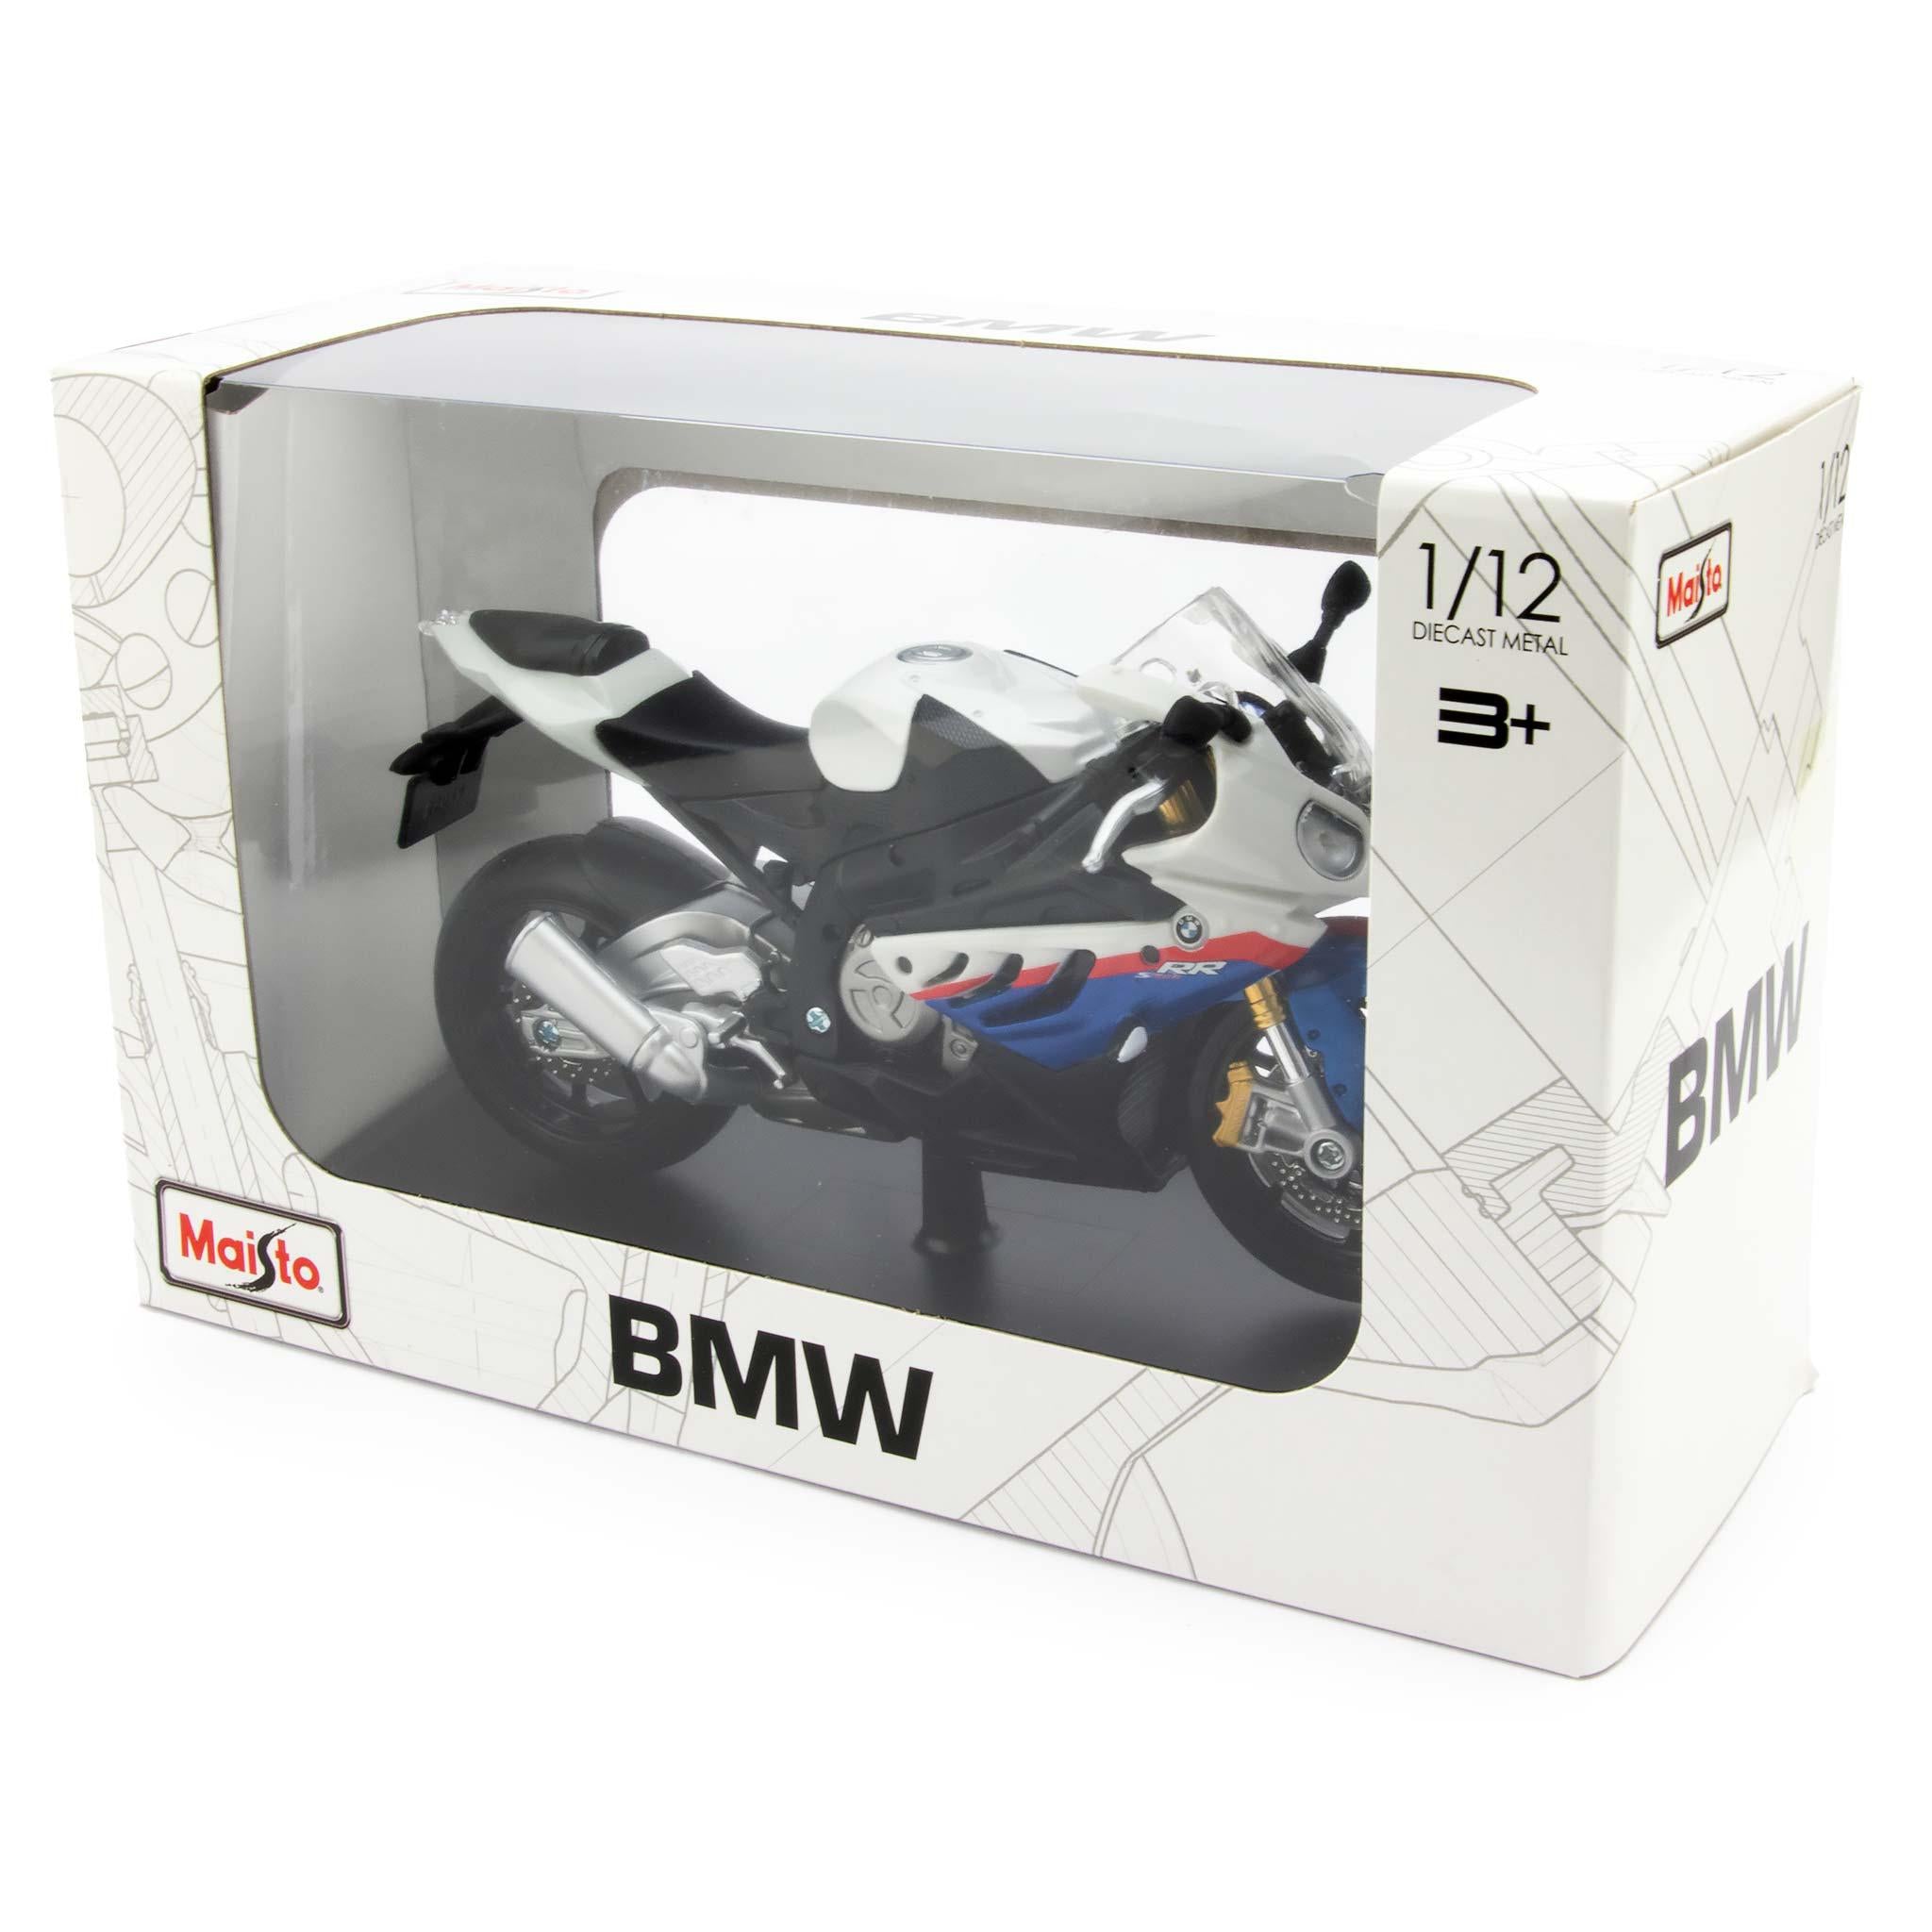 BMW S 1000 RR white - 1:12 Scale Diecast Model Motorcycle